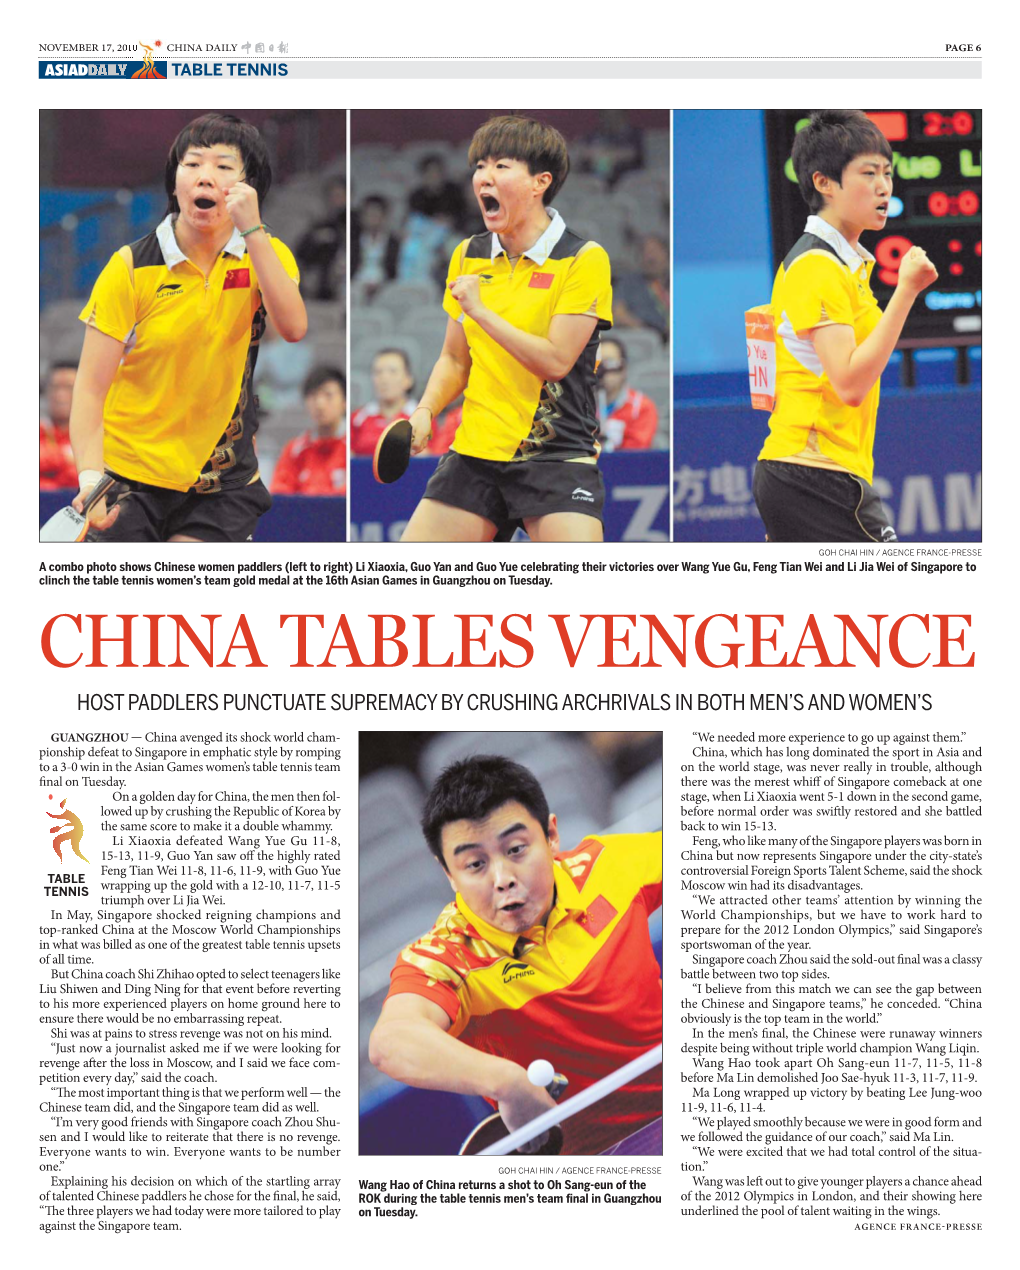 China Tables Vengeance Host Paddlers Punctuate Supremacy by Crushing Archrivals in Both Men’S and Women’S